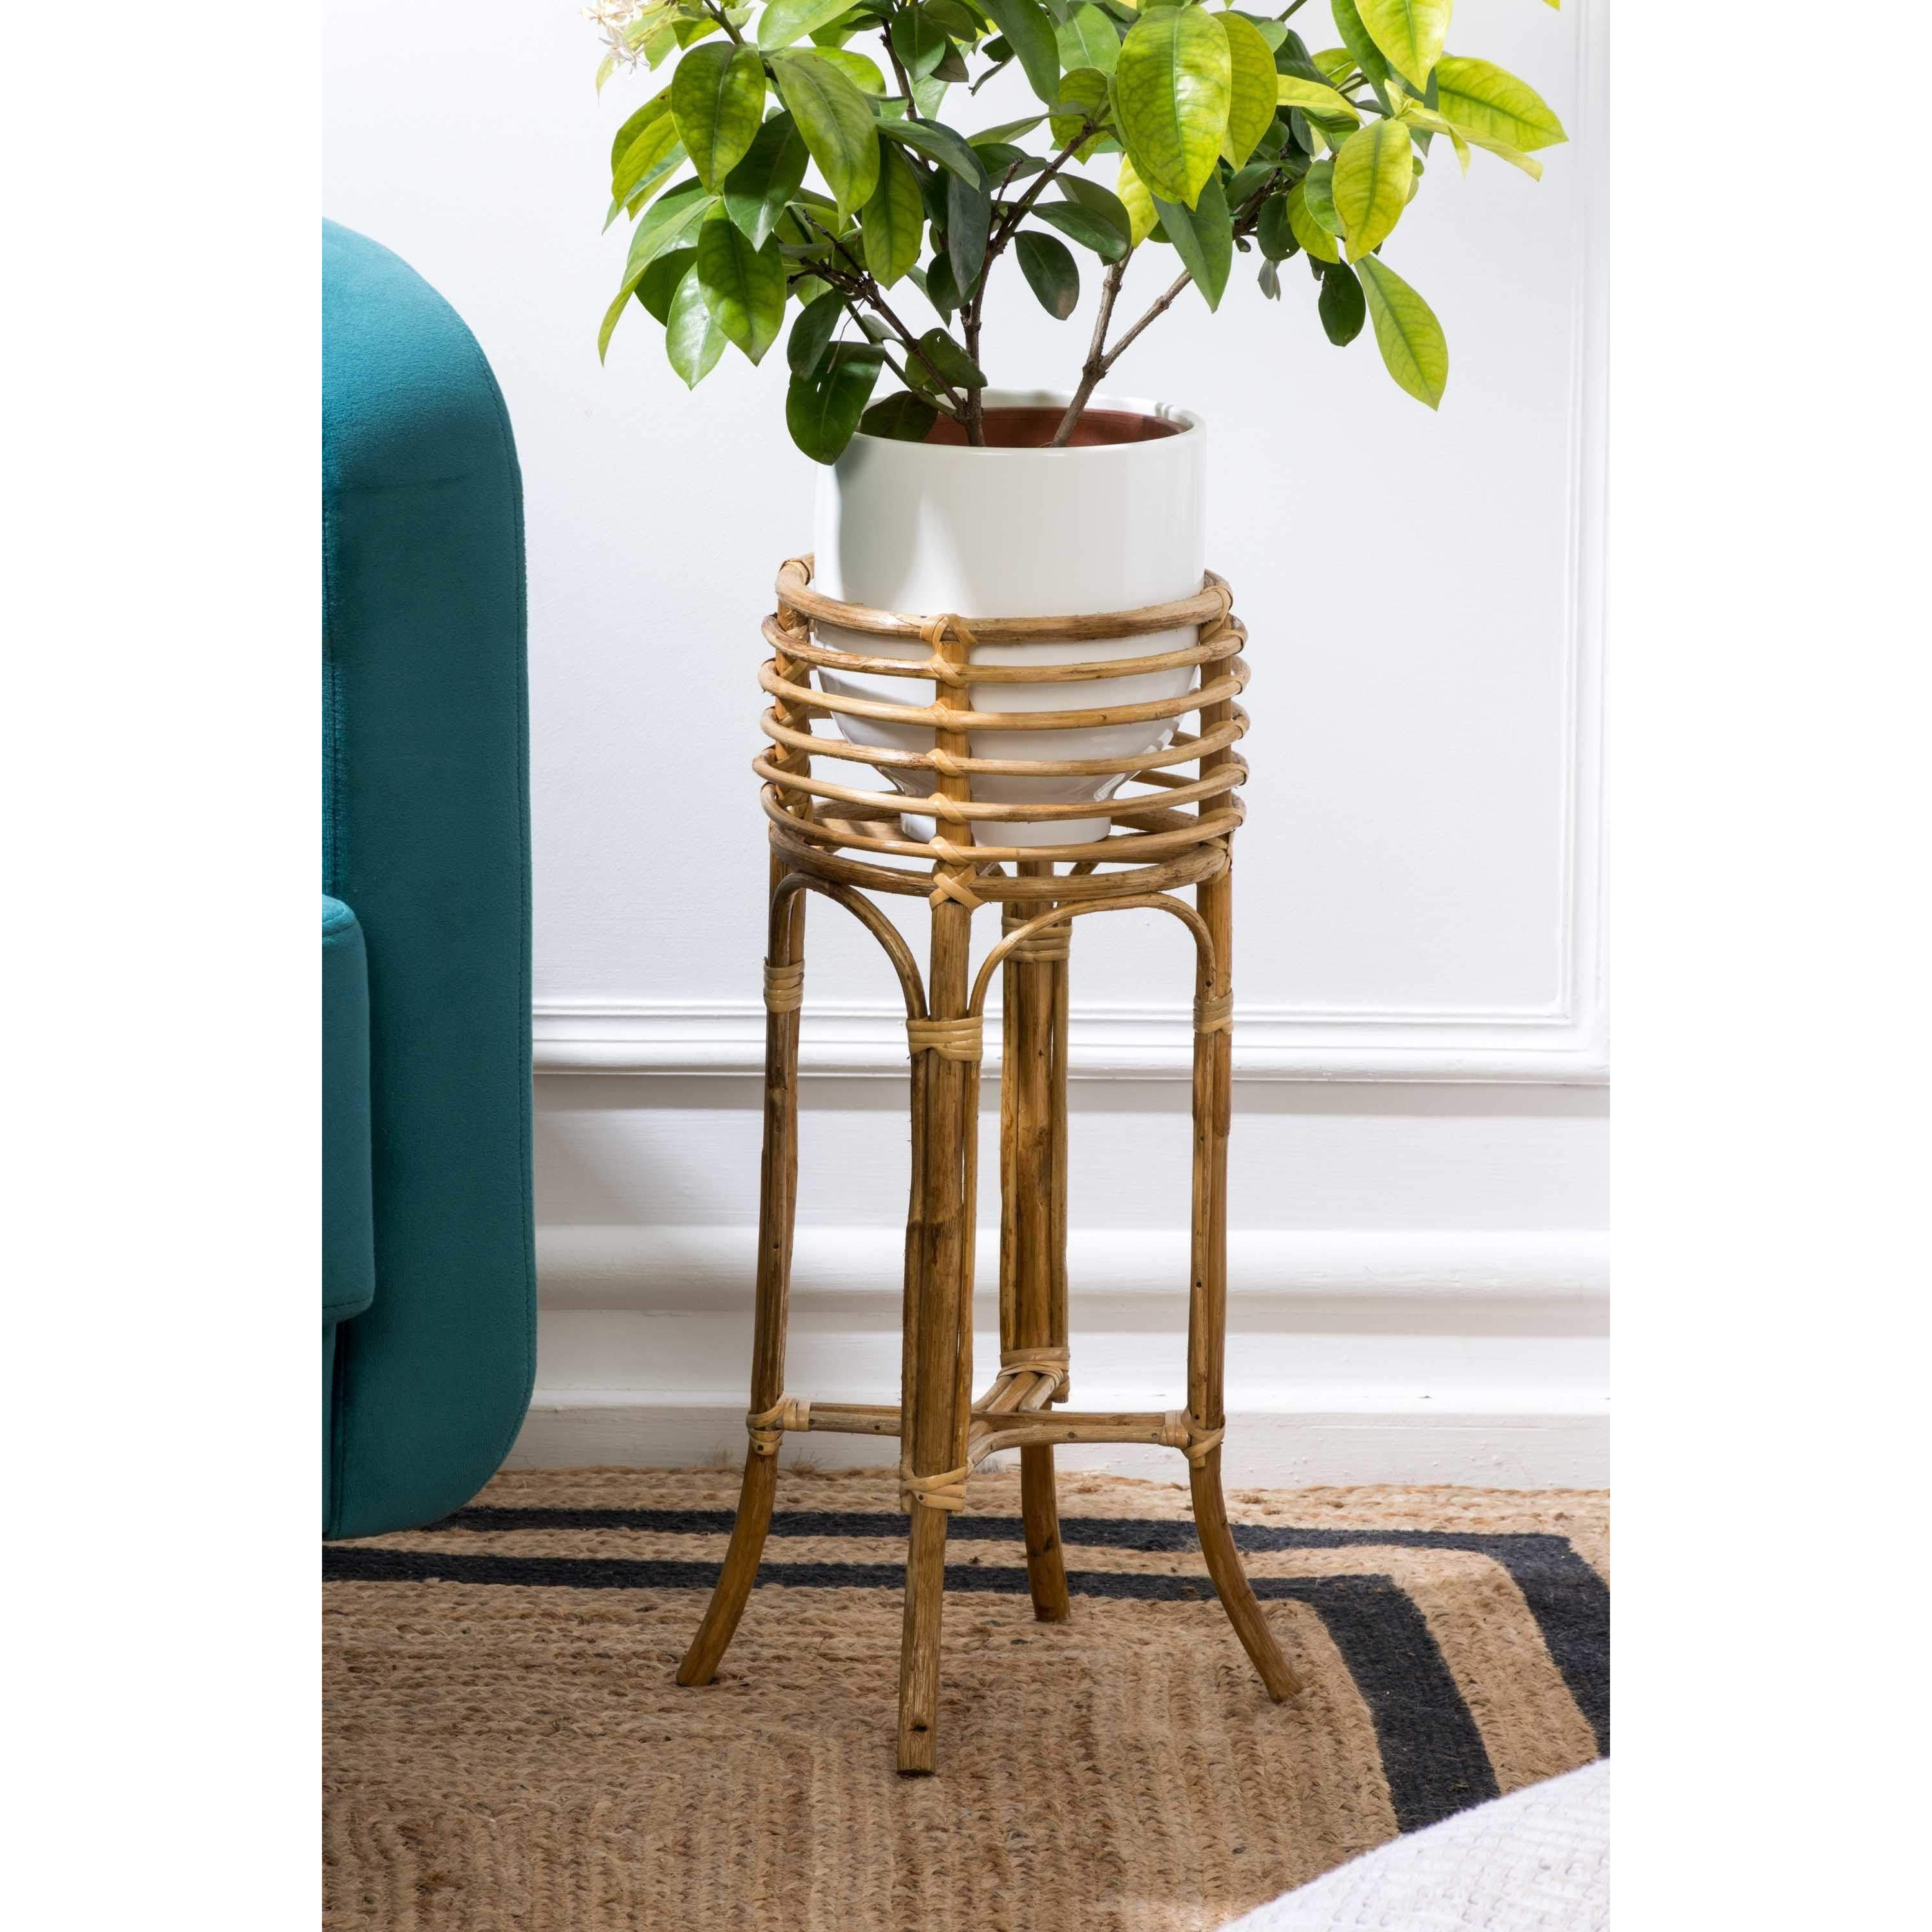 Lightweight Cane Plant Stand - image 1